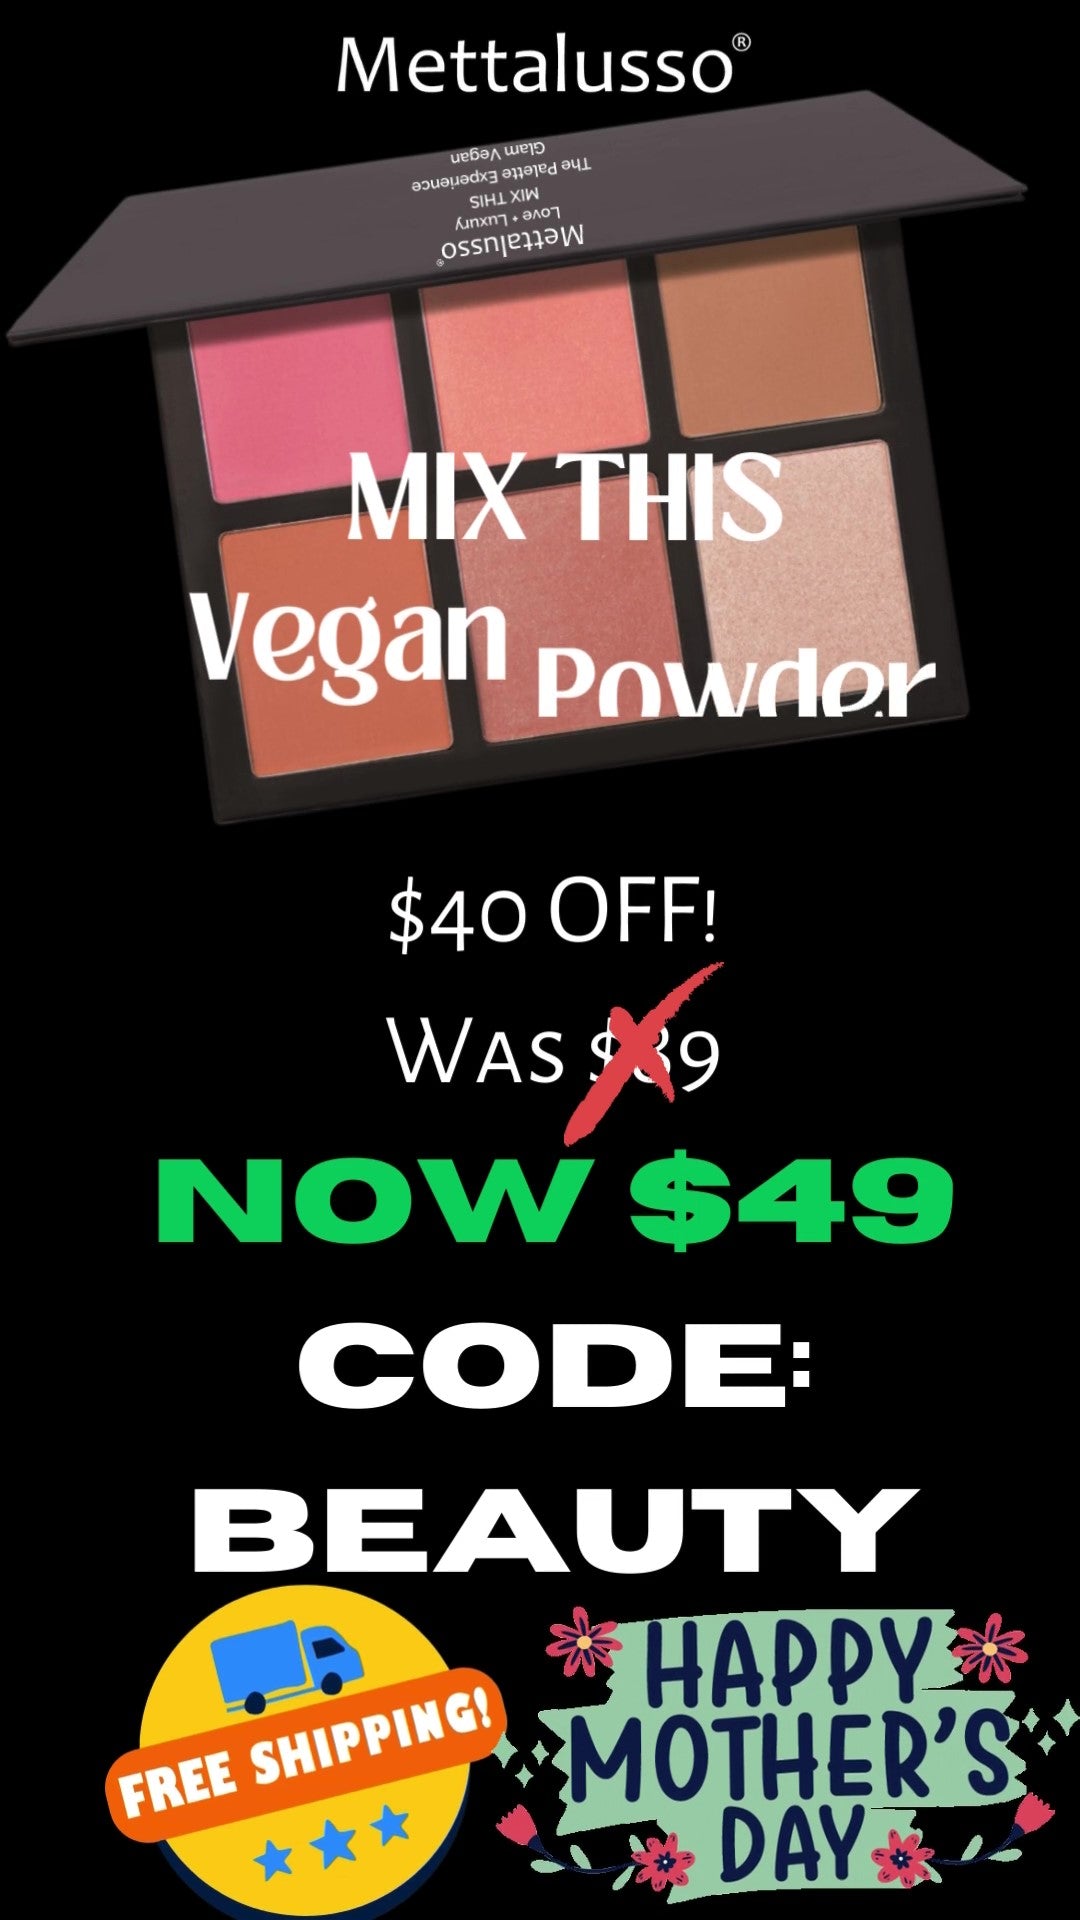 Mettalusso Mother's Day Sale is $40 off MIX THIS Vegan Color Palette